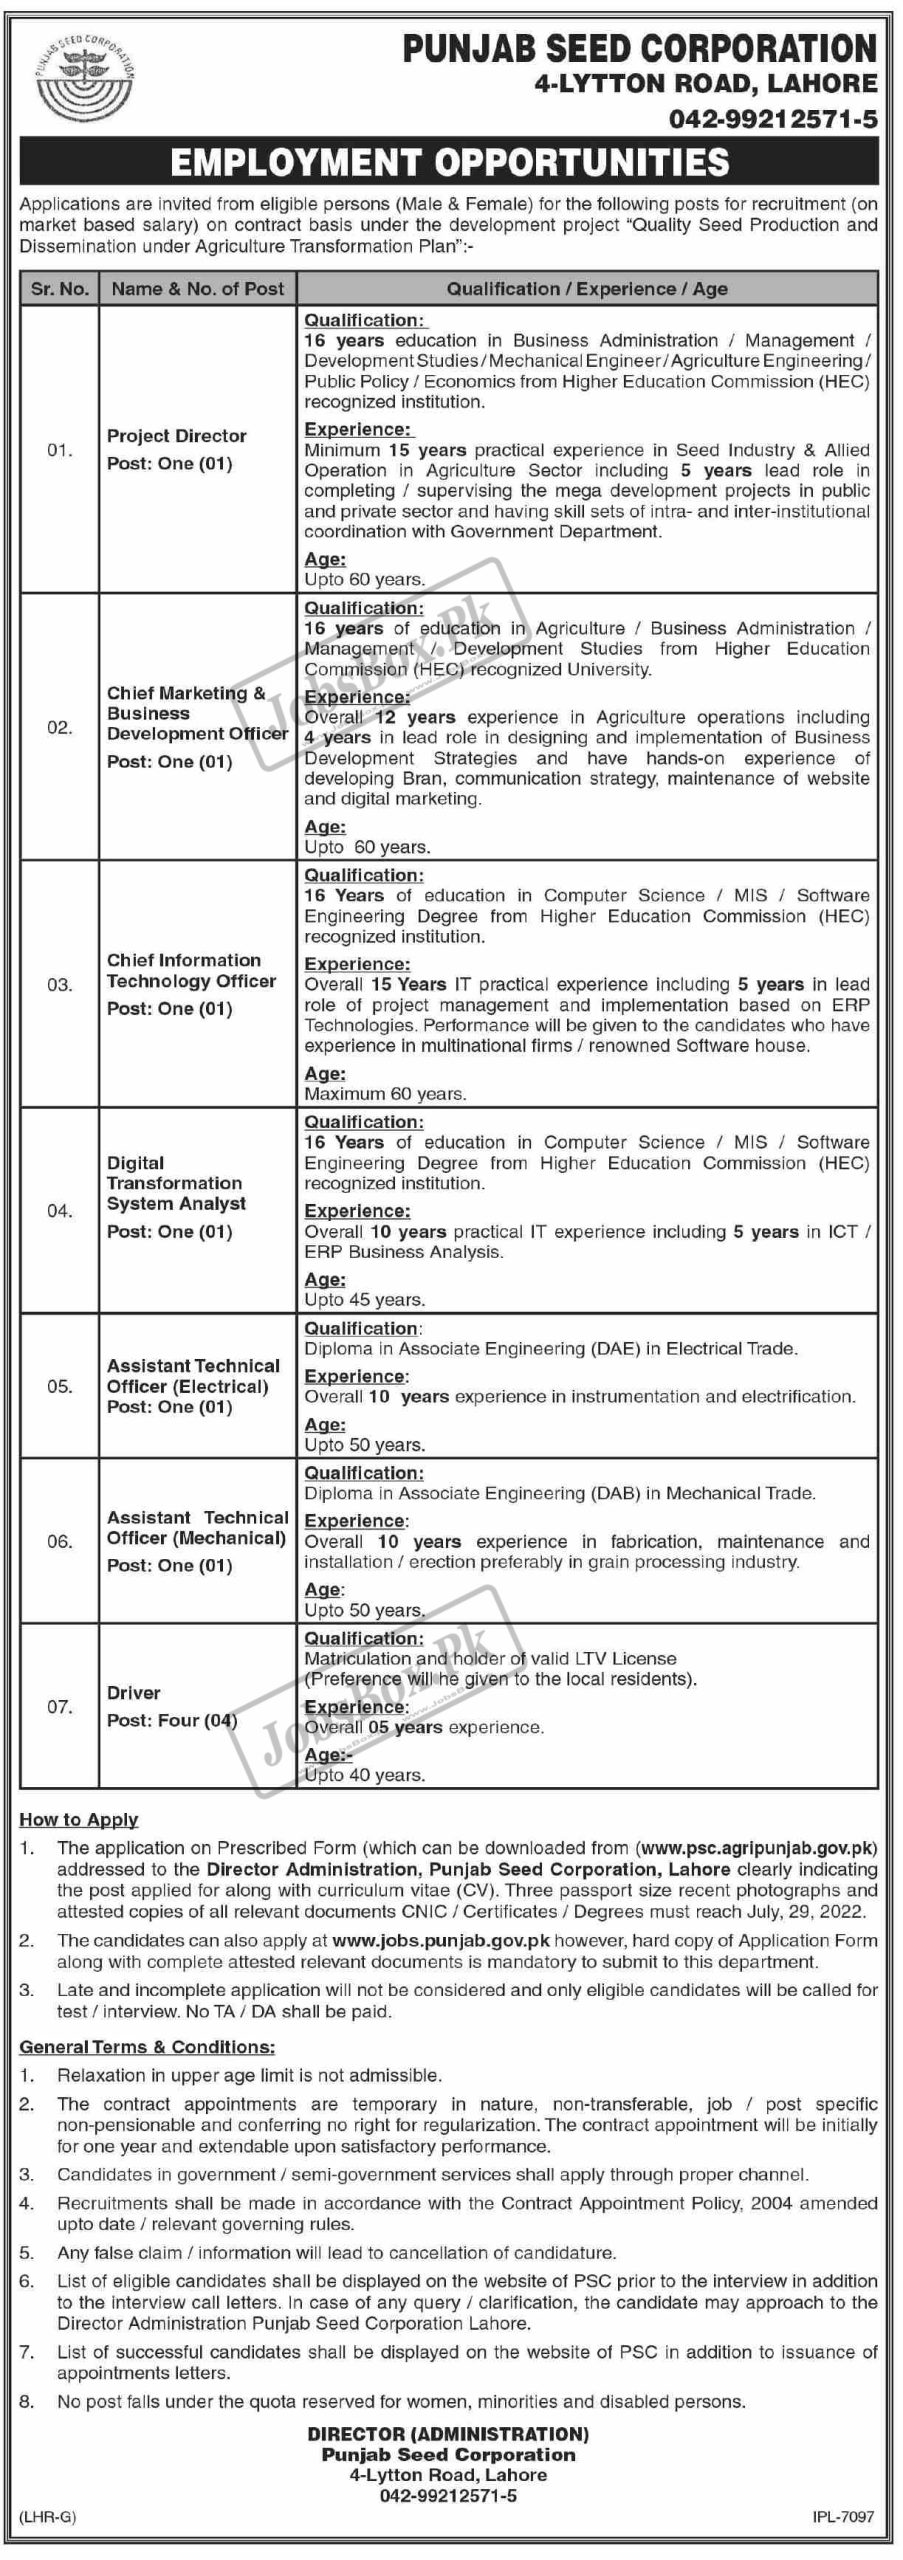 Punjab Seed Corporation Lahore Jobs 2022 - Download Form Online